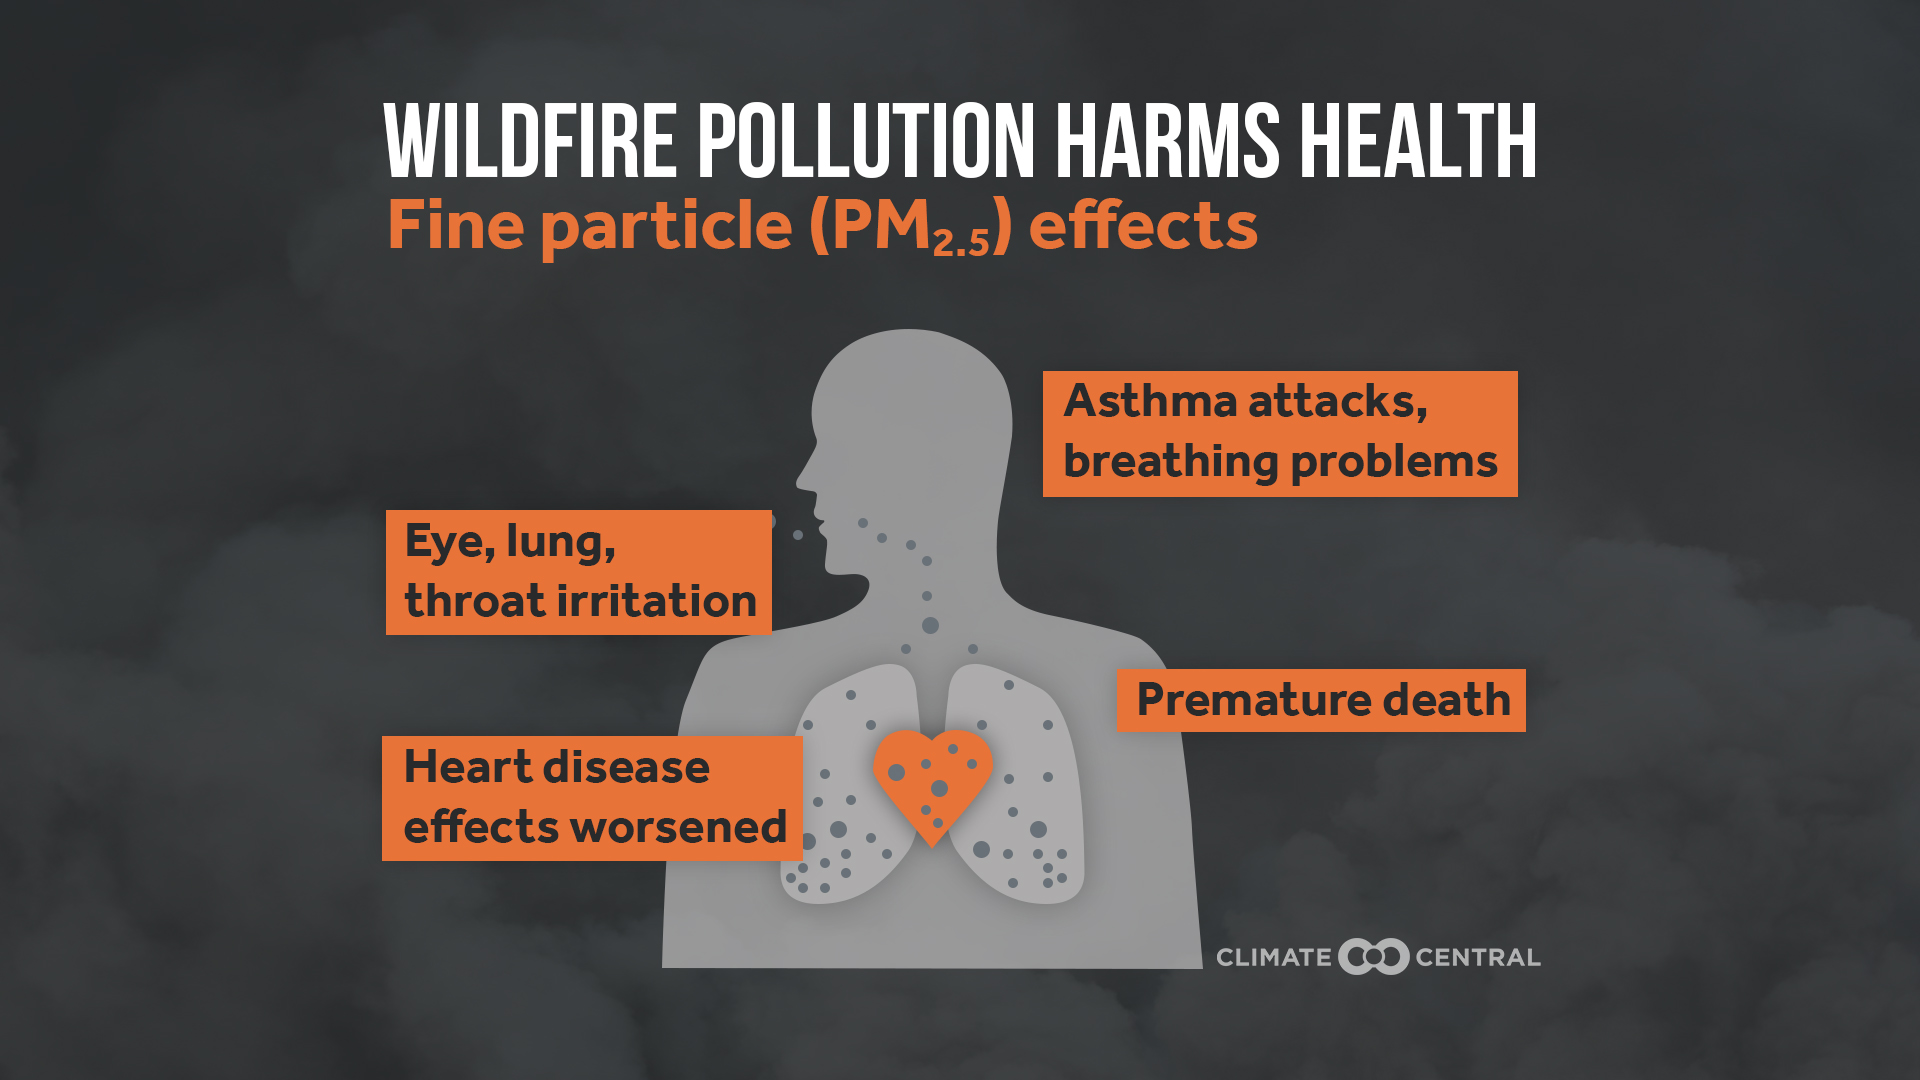 Graph showing effects of wildfire smoke